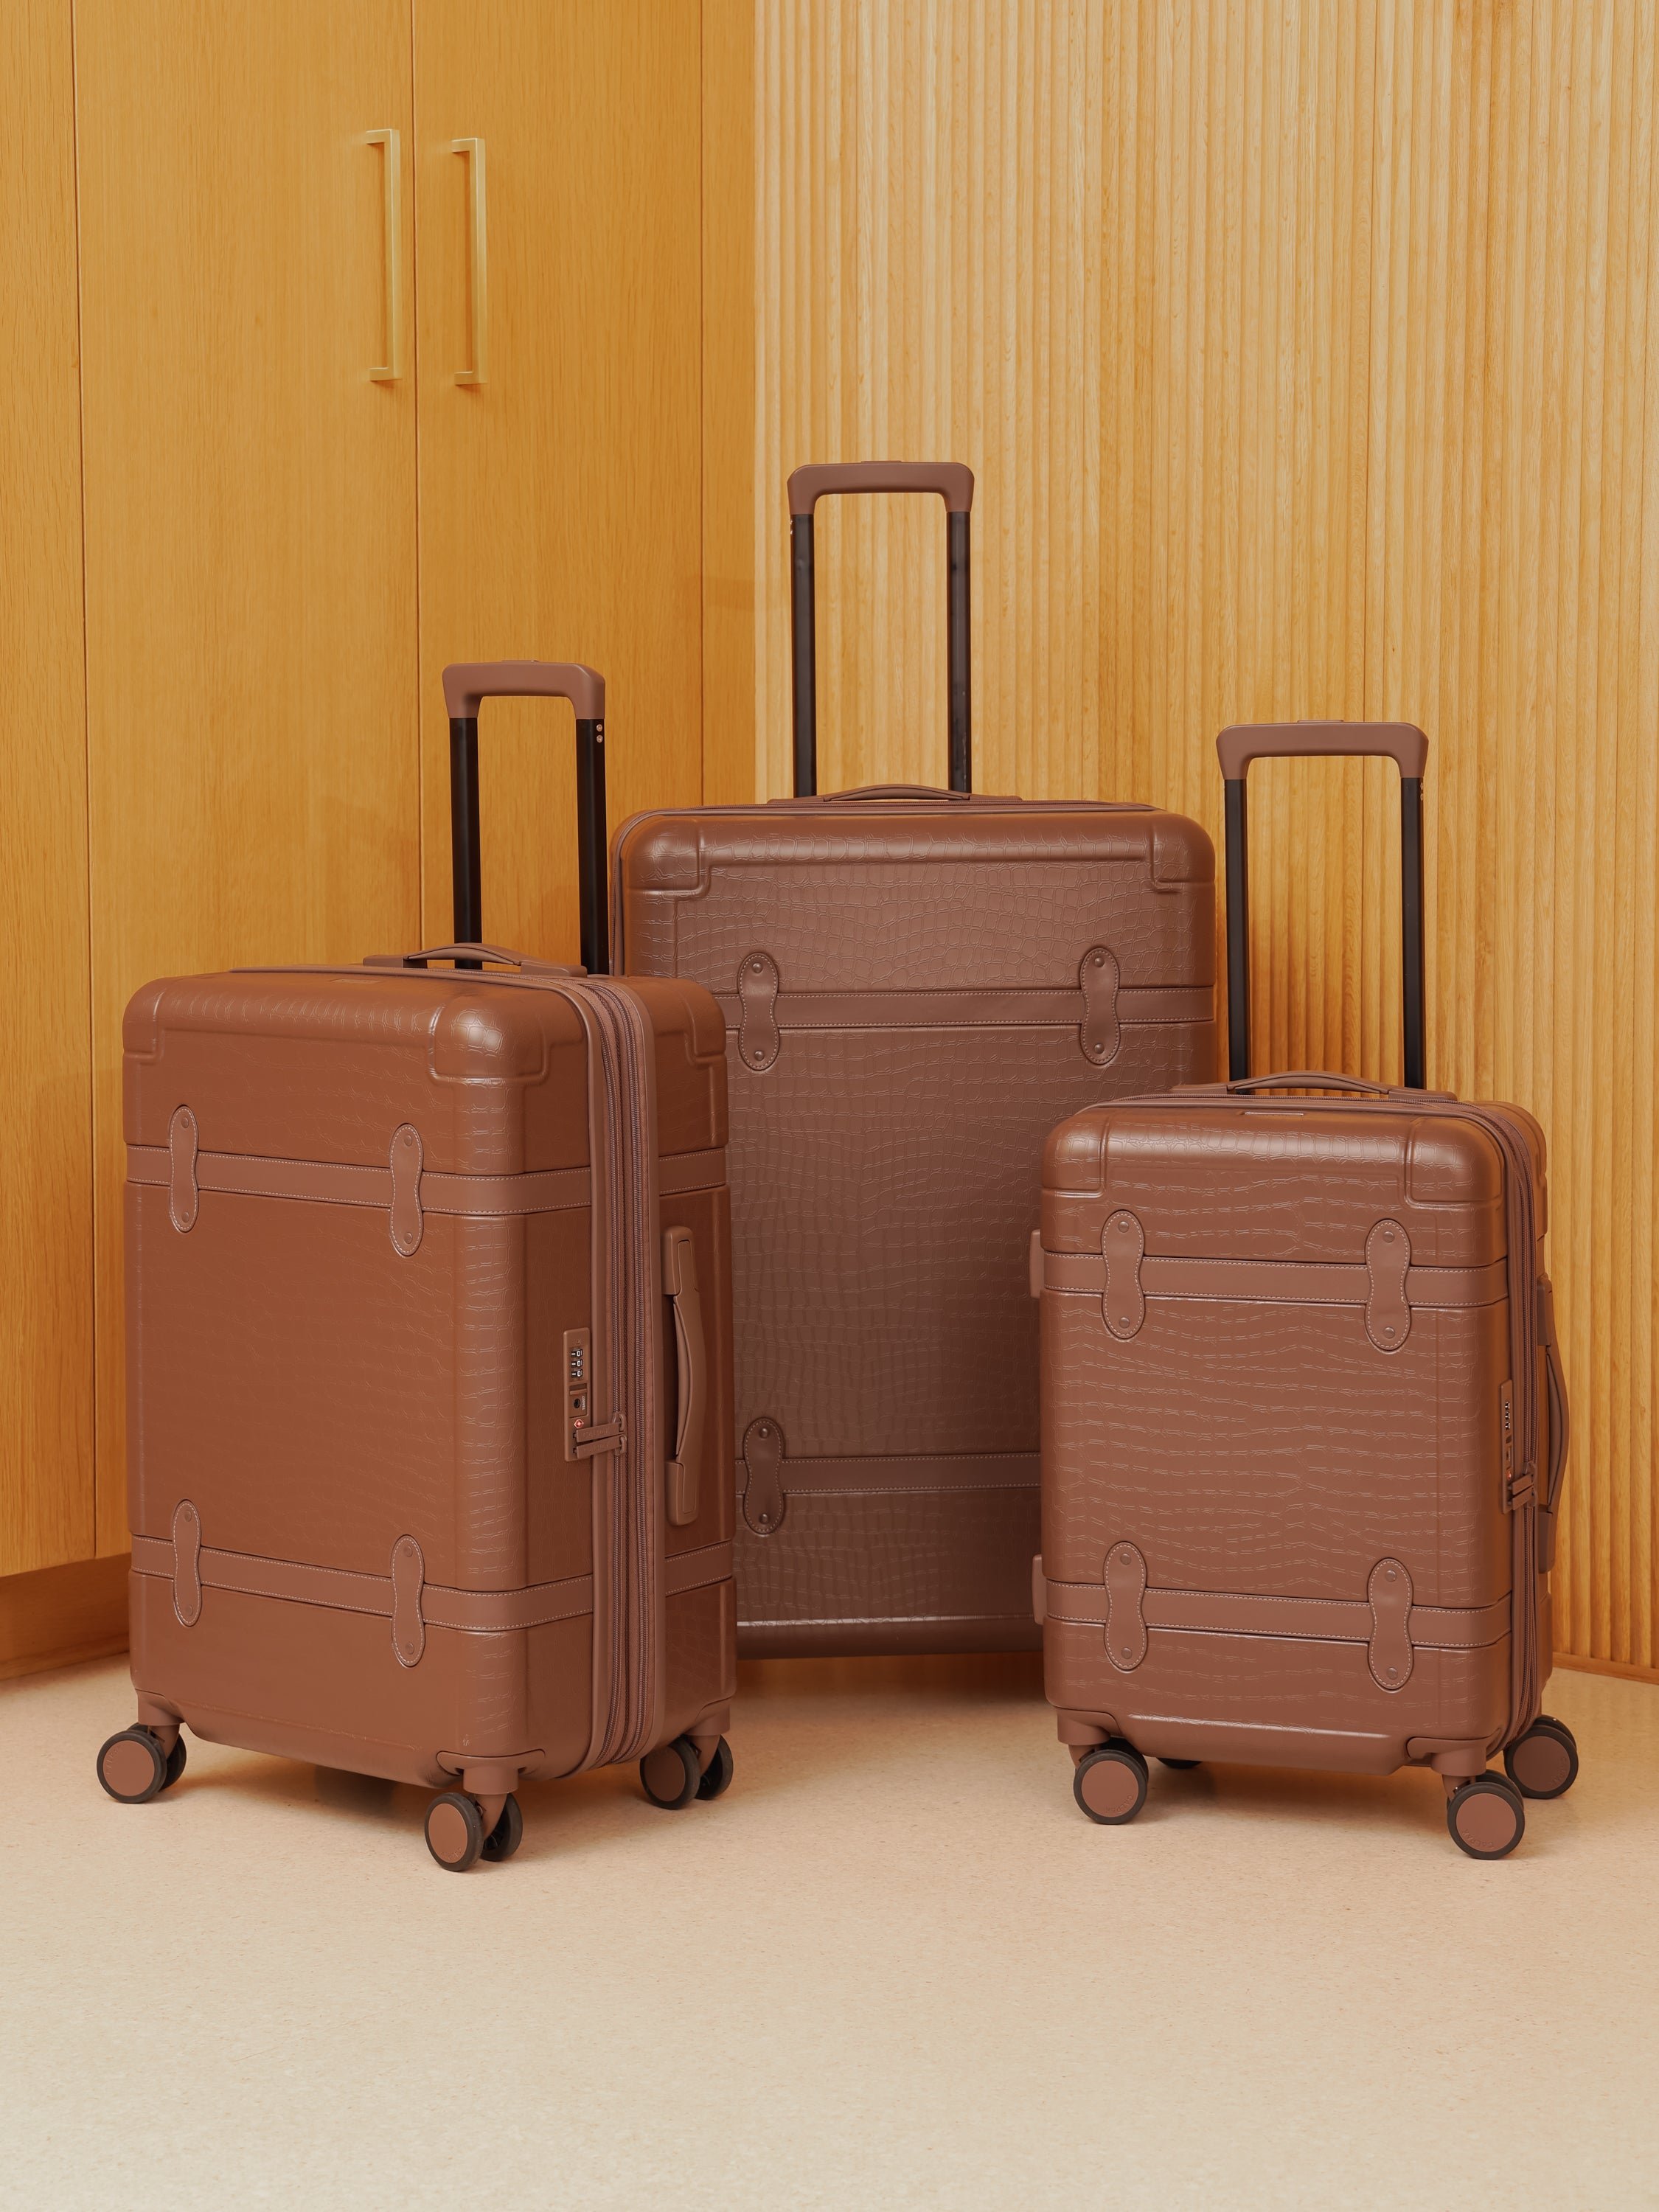 CALPAK TRNK 3 piece luggage set with hard shell exterior and 360 spinner wheels in espresso